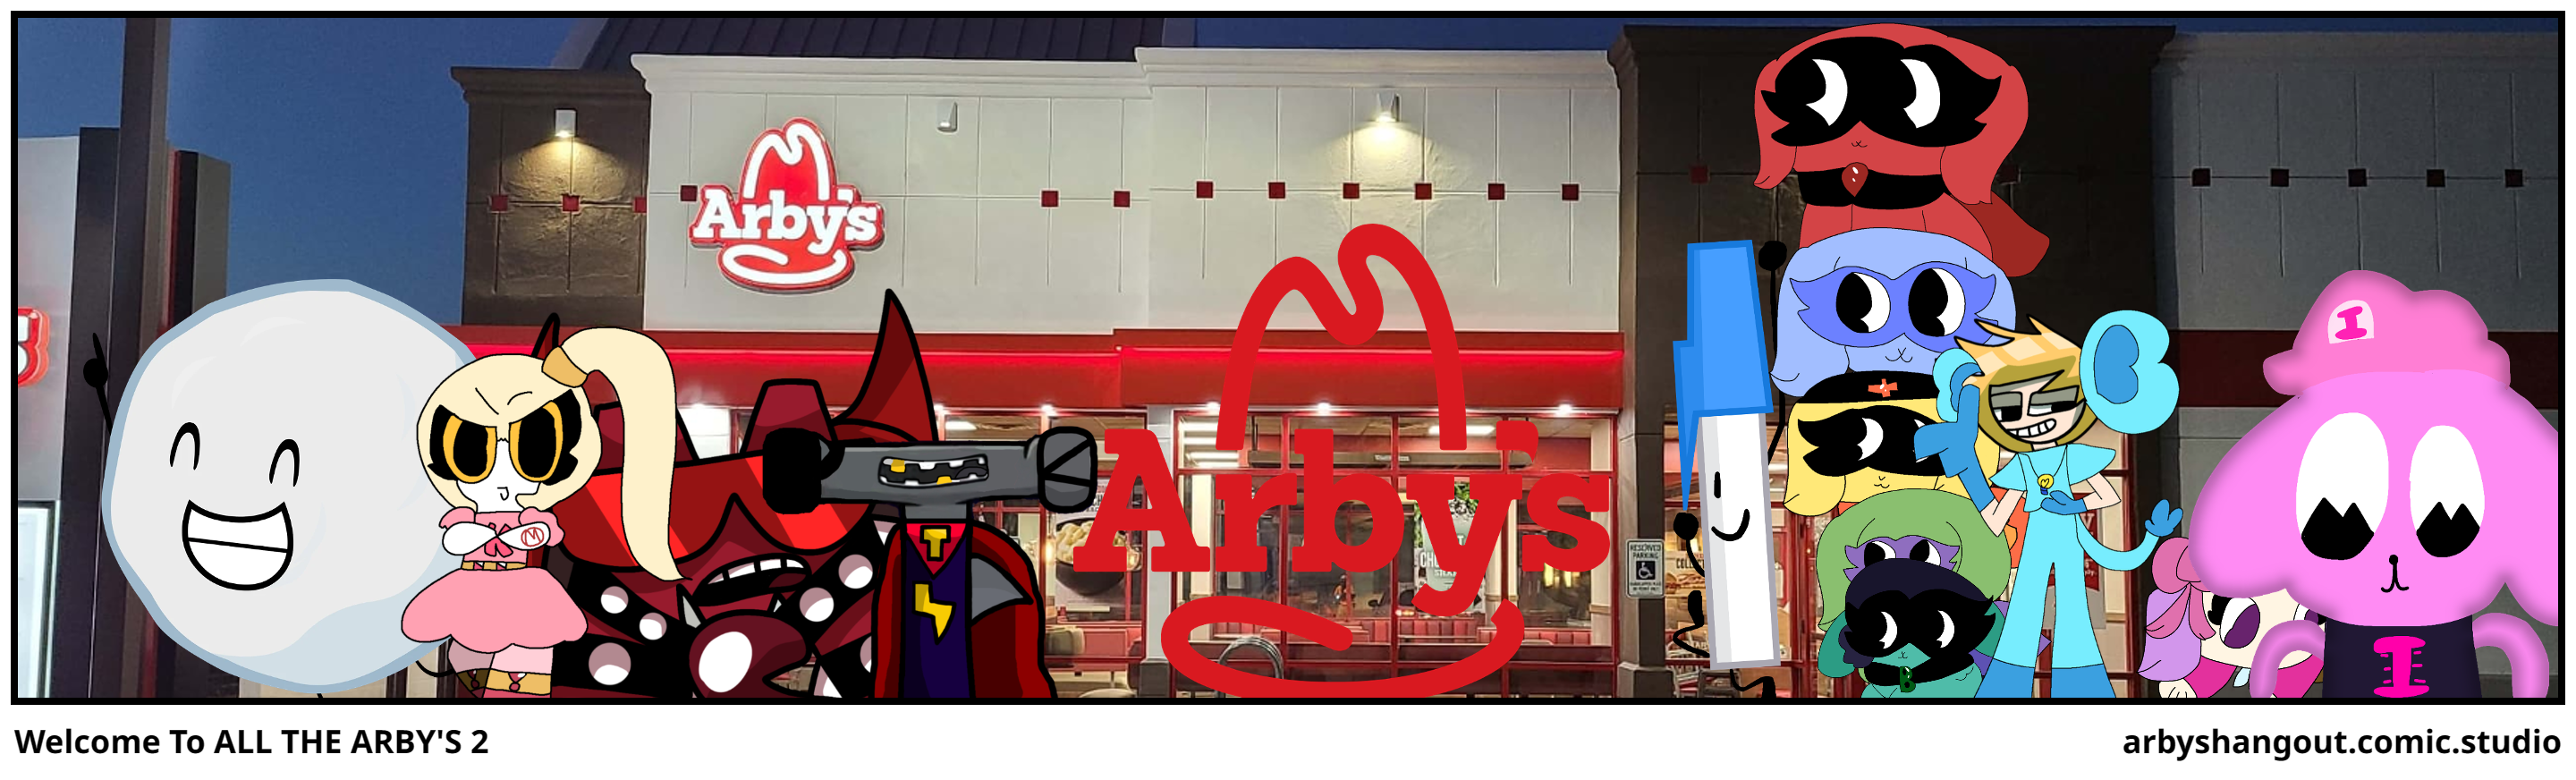 Welcome To ALL THE ARBY'S 2